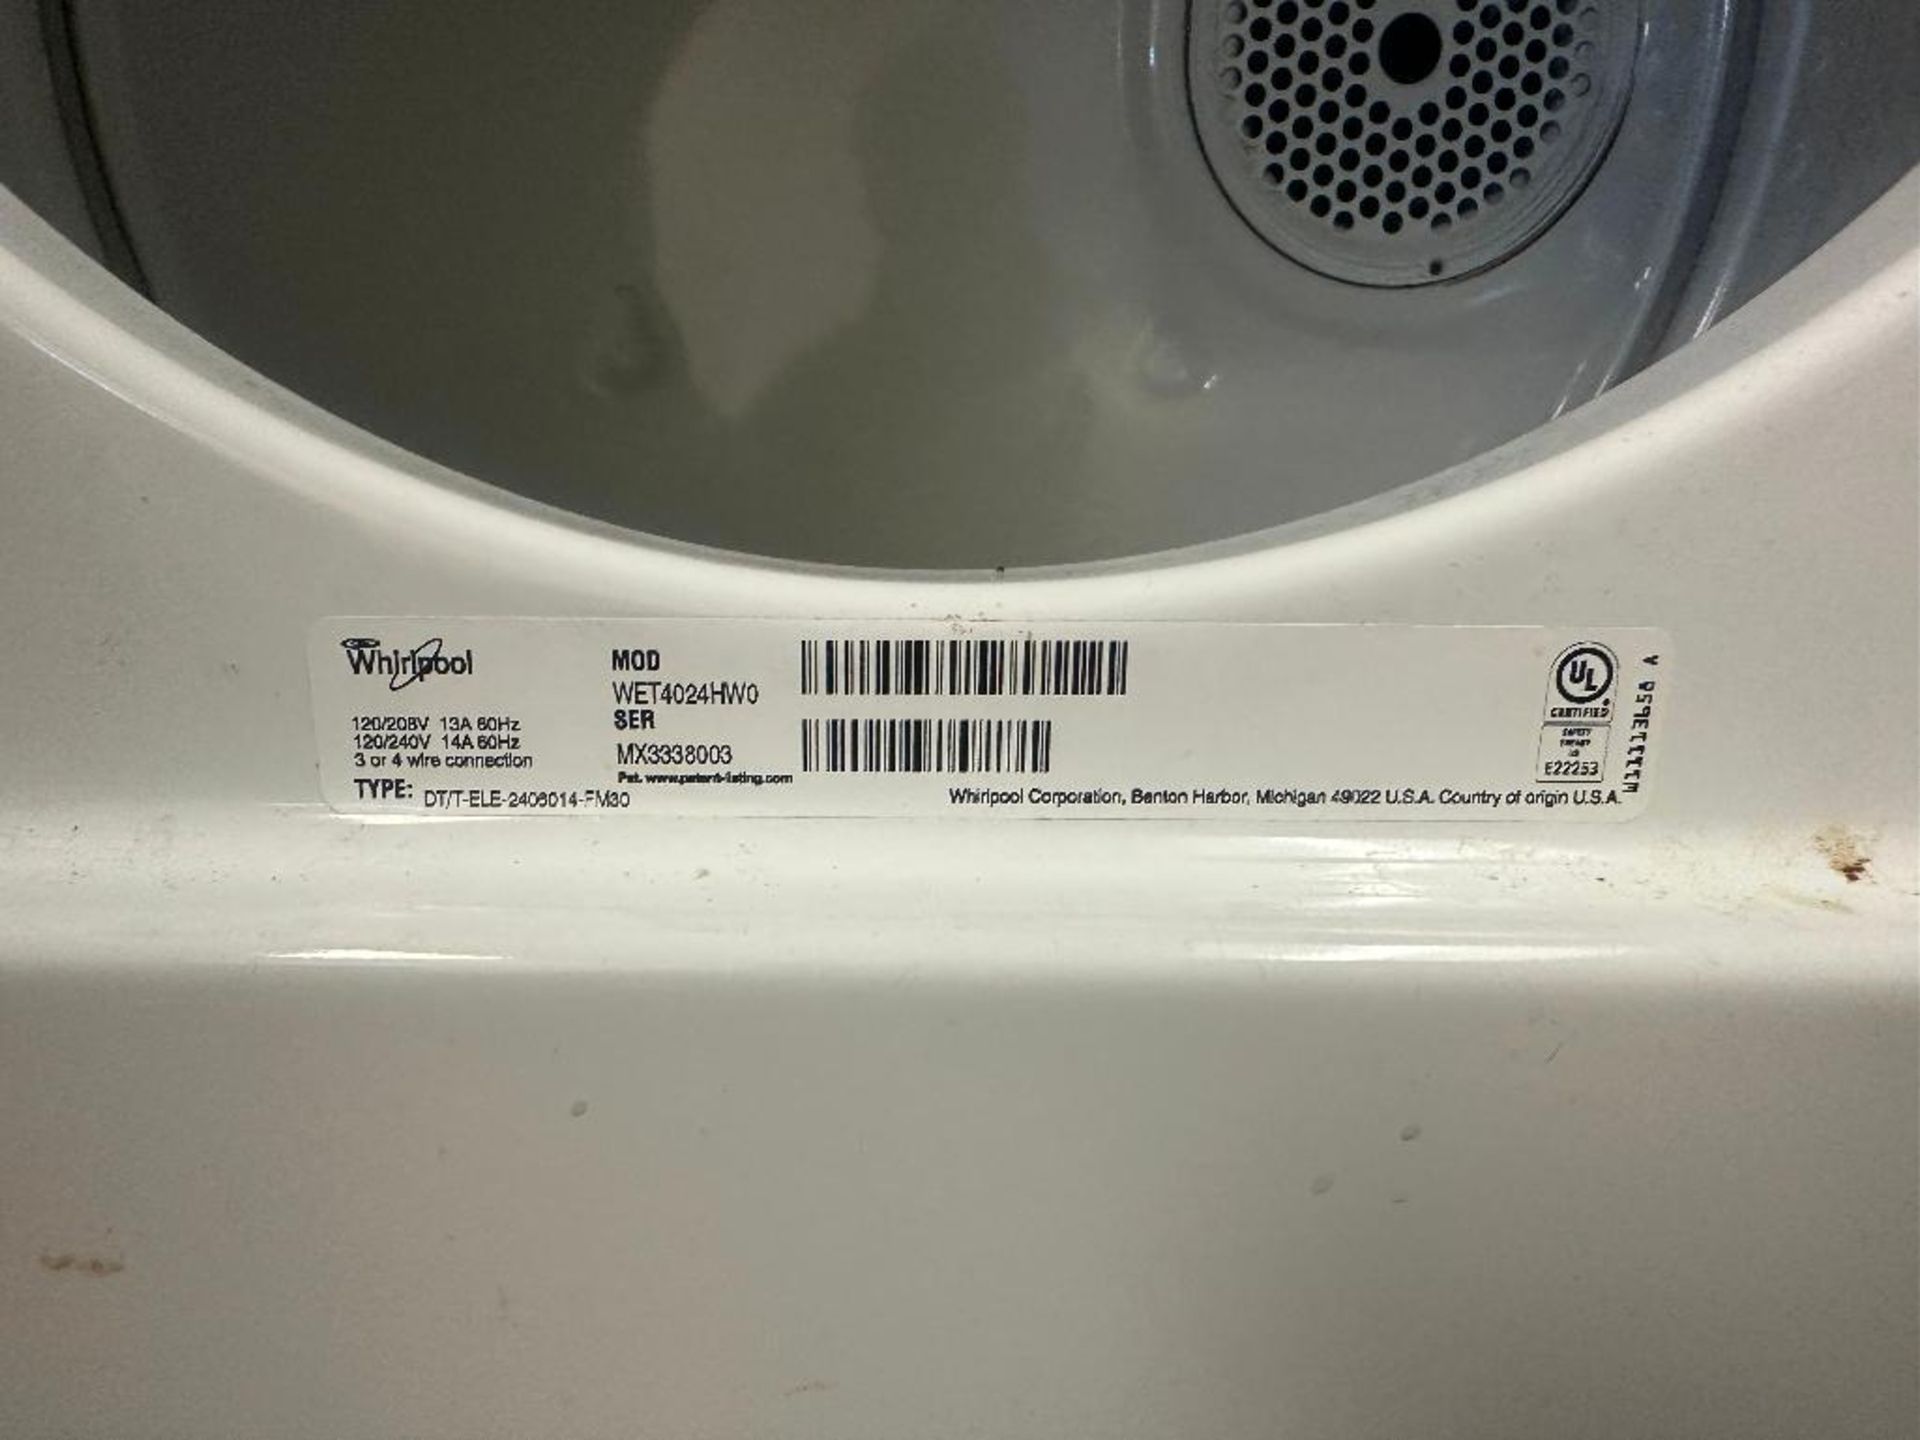 DESCRIPTION WHIRLPOOL WASHER AND DRYER ALL IN ONE BRAND / MODEL: WHIRLPOOL LOCATION 7399 O'Connor Dr - Image 3 of 4